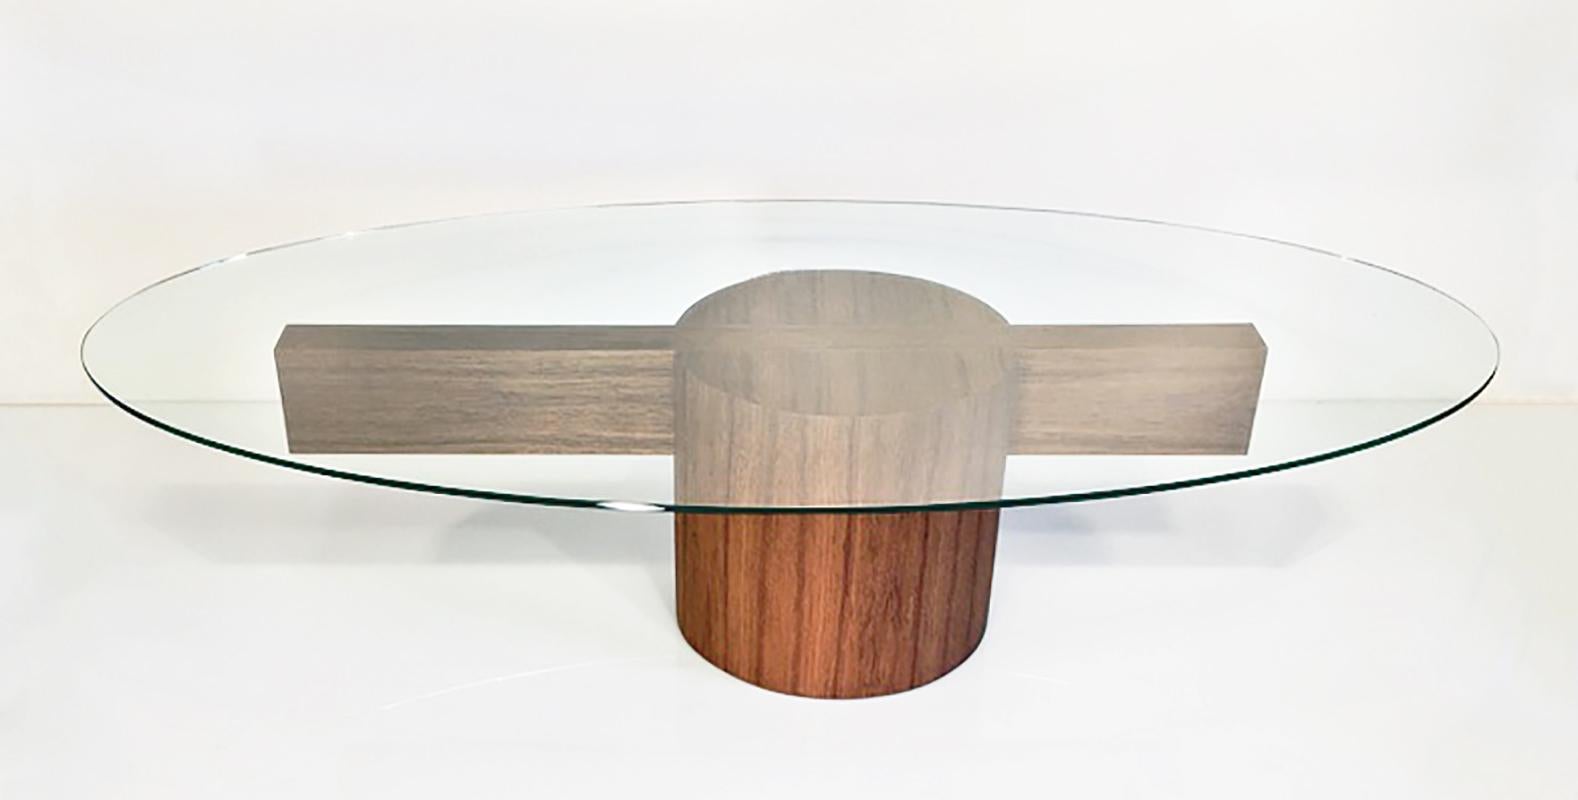 This is the first inter-active table that William Earle has designed since the 'Nude Descending Table',
commissioned by SFMOMA in 2010.
The beam slides through the tenon - the base can be symmetrical or not.
(Shown here in an asymmetrical